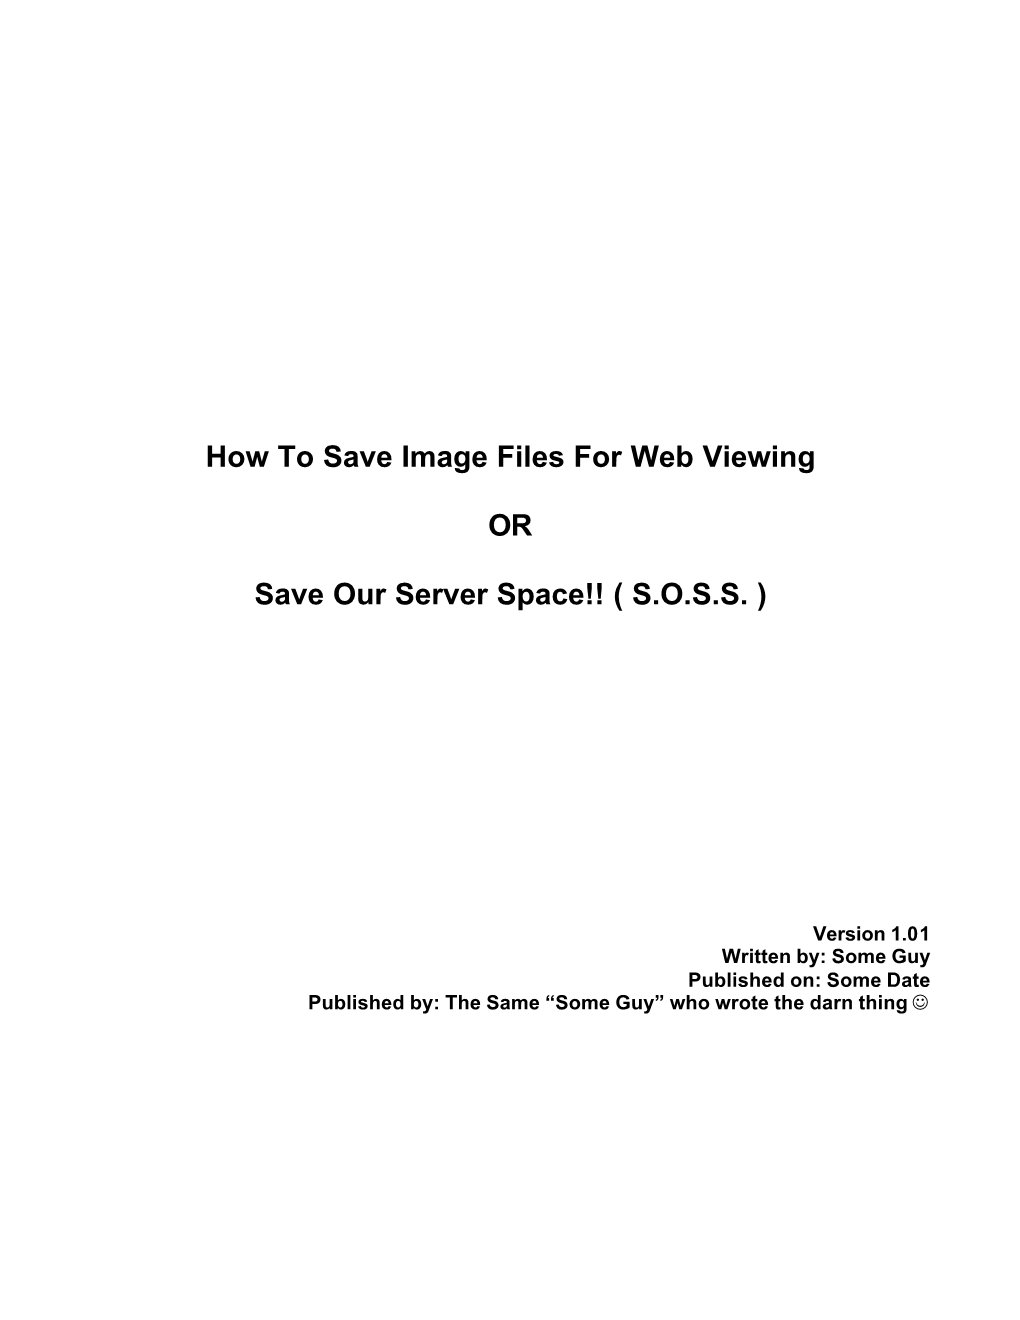 How to Save Image Files for Web Viewing